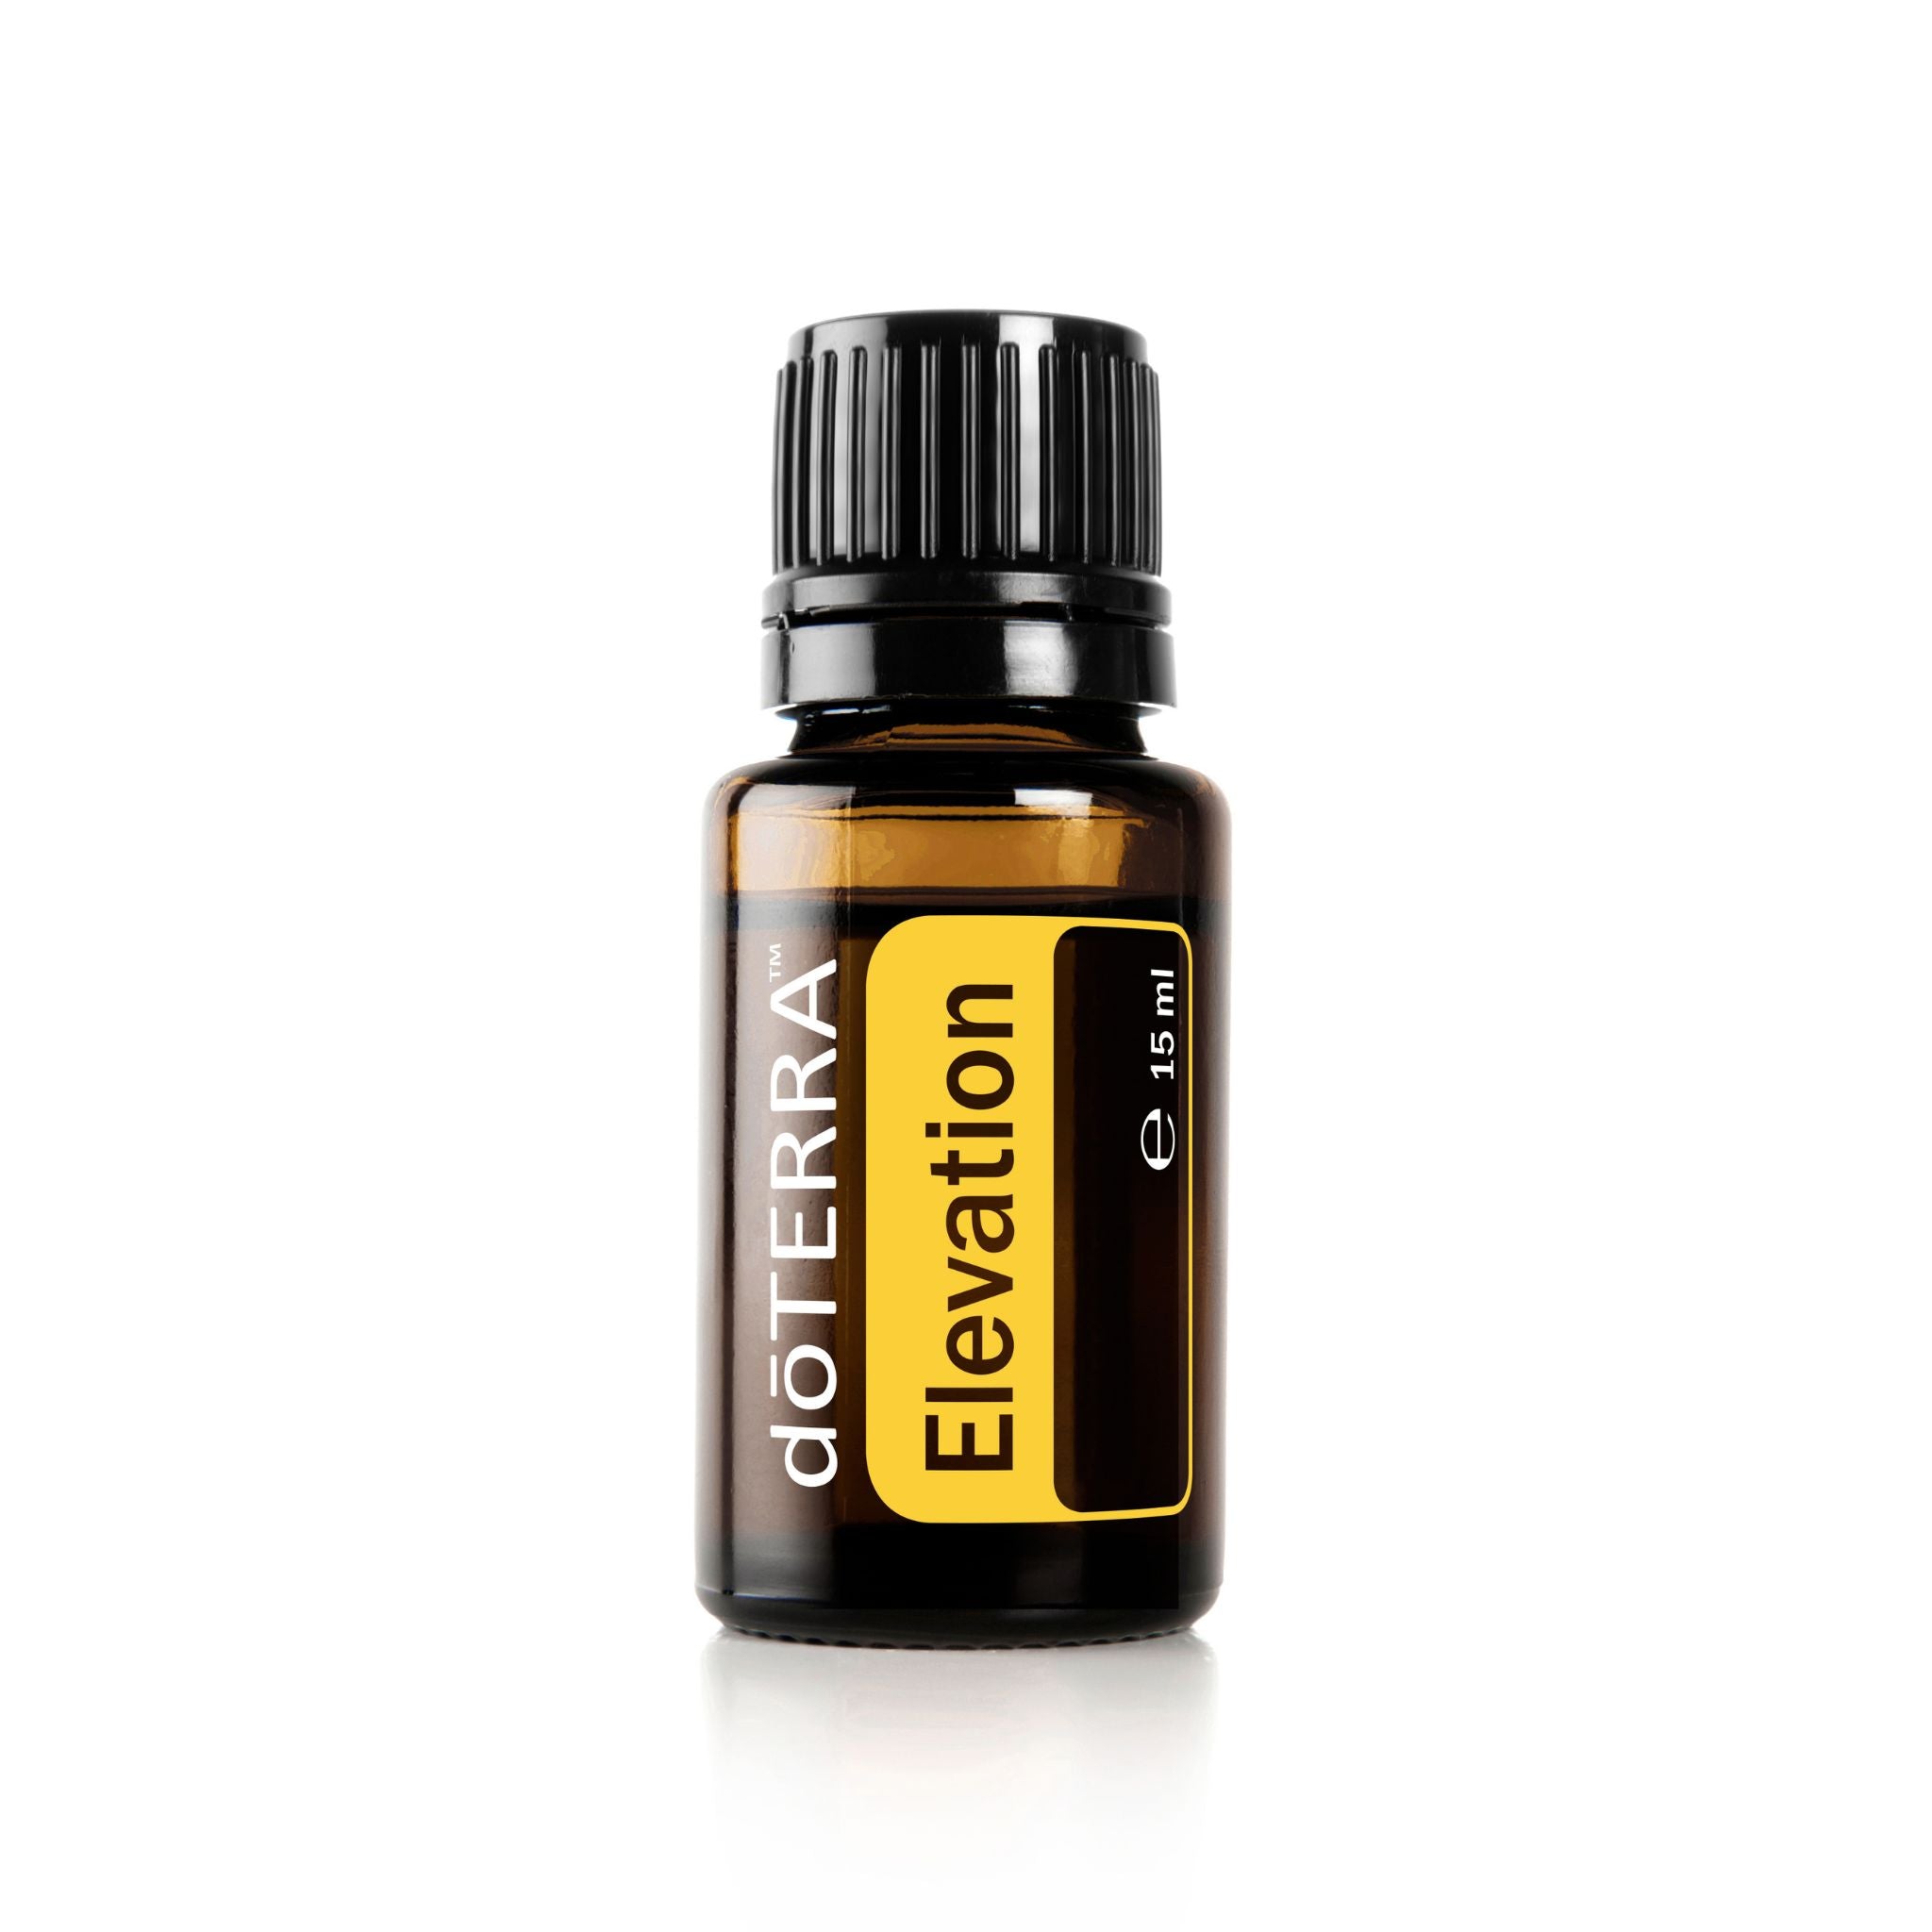 Elevation Essential Oil promotes a positive mood and feelings of confidence. Glass bottle, yellow label, 15 ml